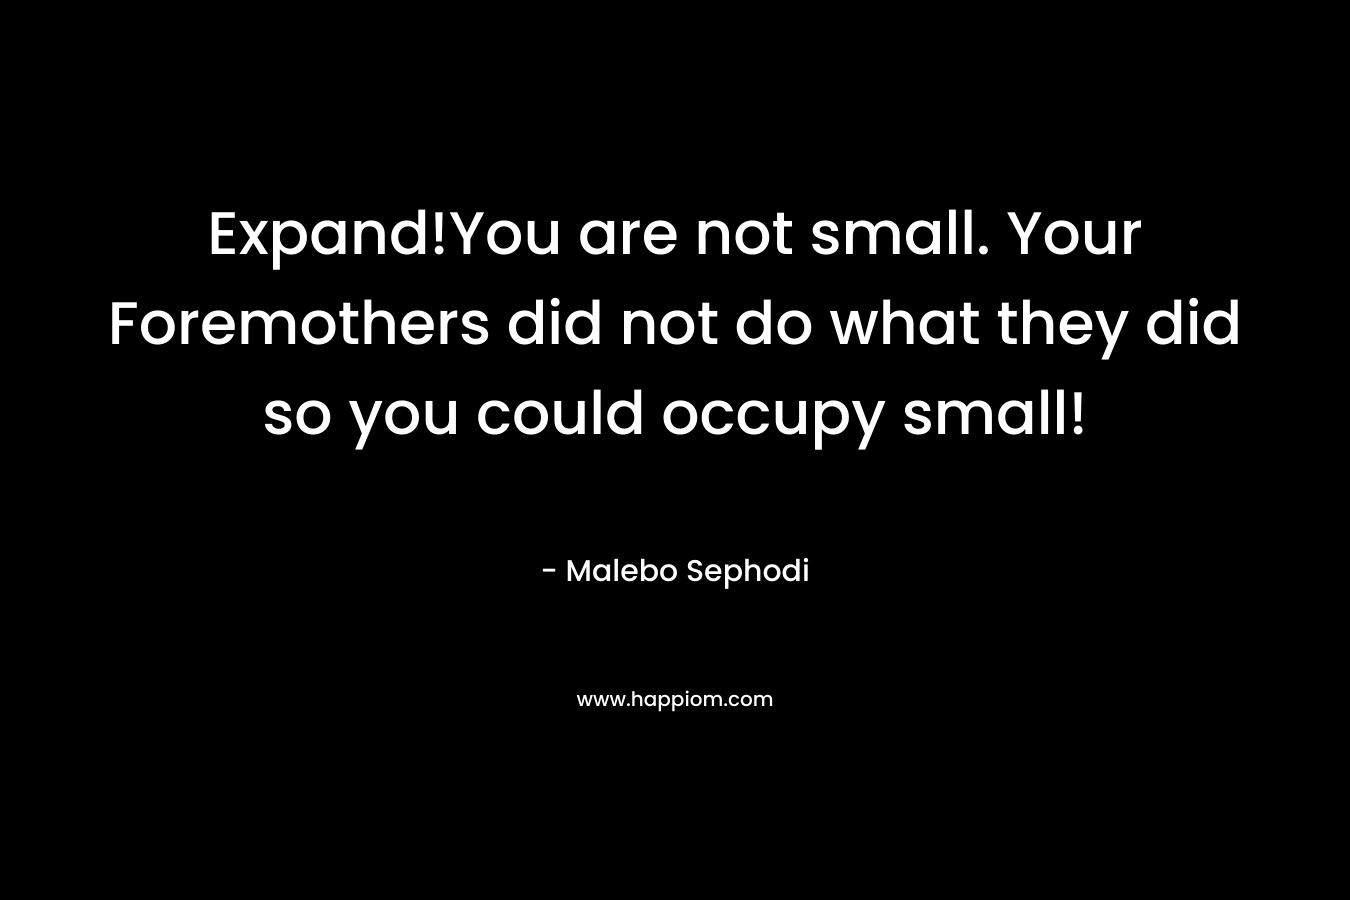 Expand!You are not small. Your Foremothers did not do what they did so you could occupy small! – Malebo Sephodi